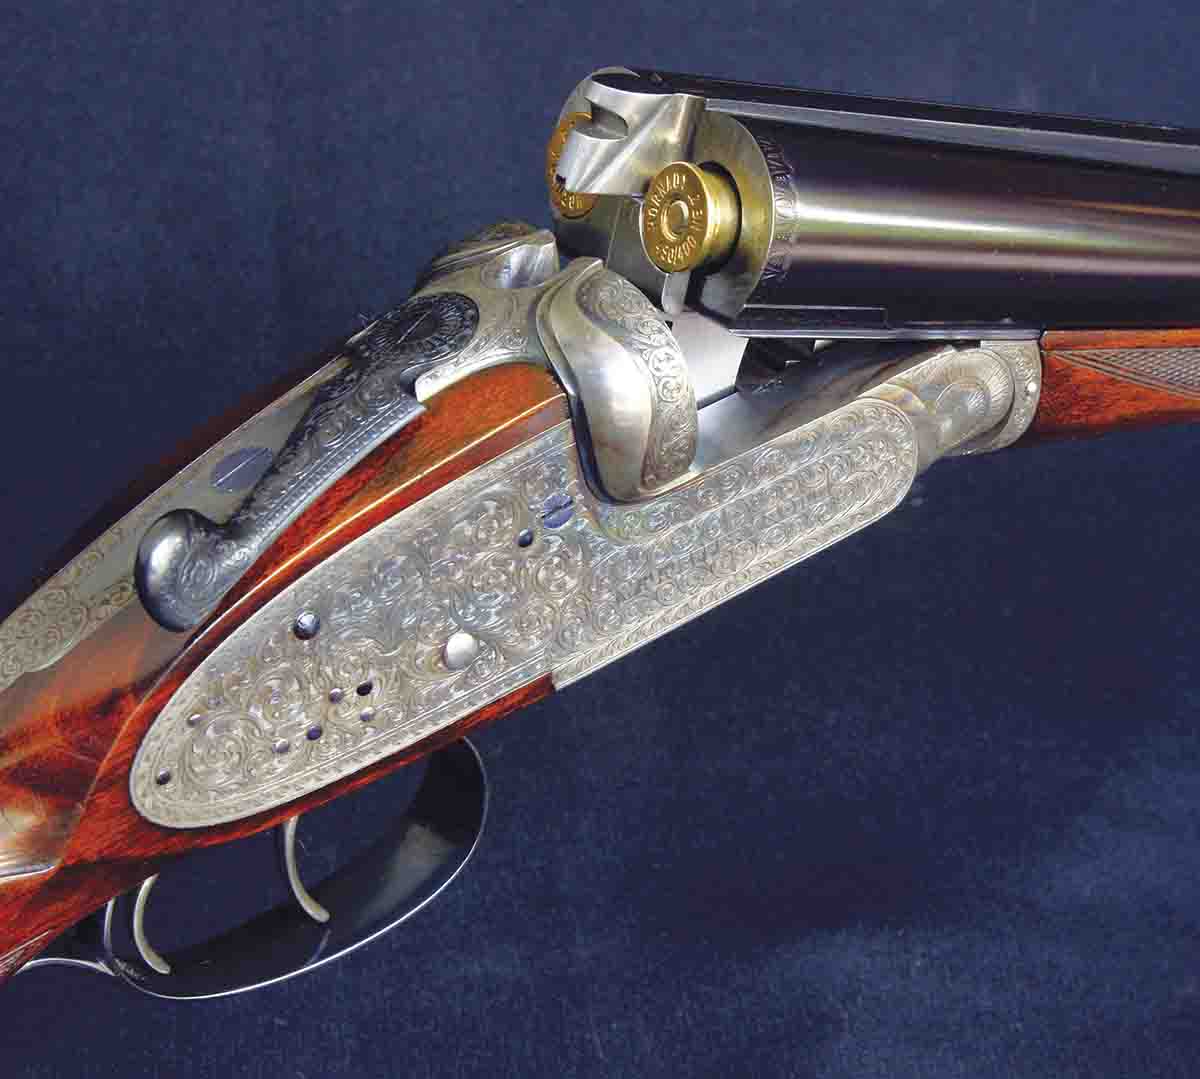 This W.J. Jeffery sidelock in .450/.400 Nitro Express (3-inch) is an unqualified London “best” and has one of the most elaborate doll’s head third bites. A sliding bolt coming out of the standing breech locks into the upper recess in the doll’s head, while the groove along the bottom is a guide for the extractors.